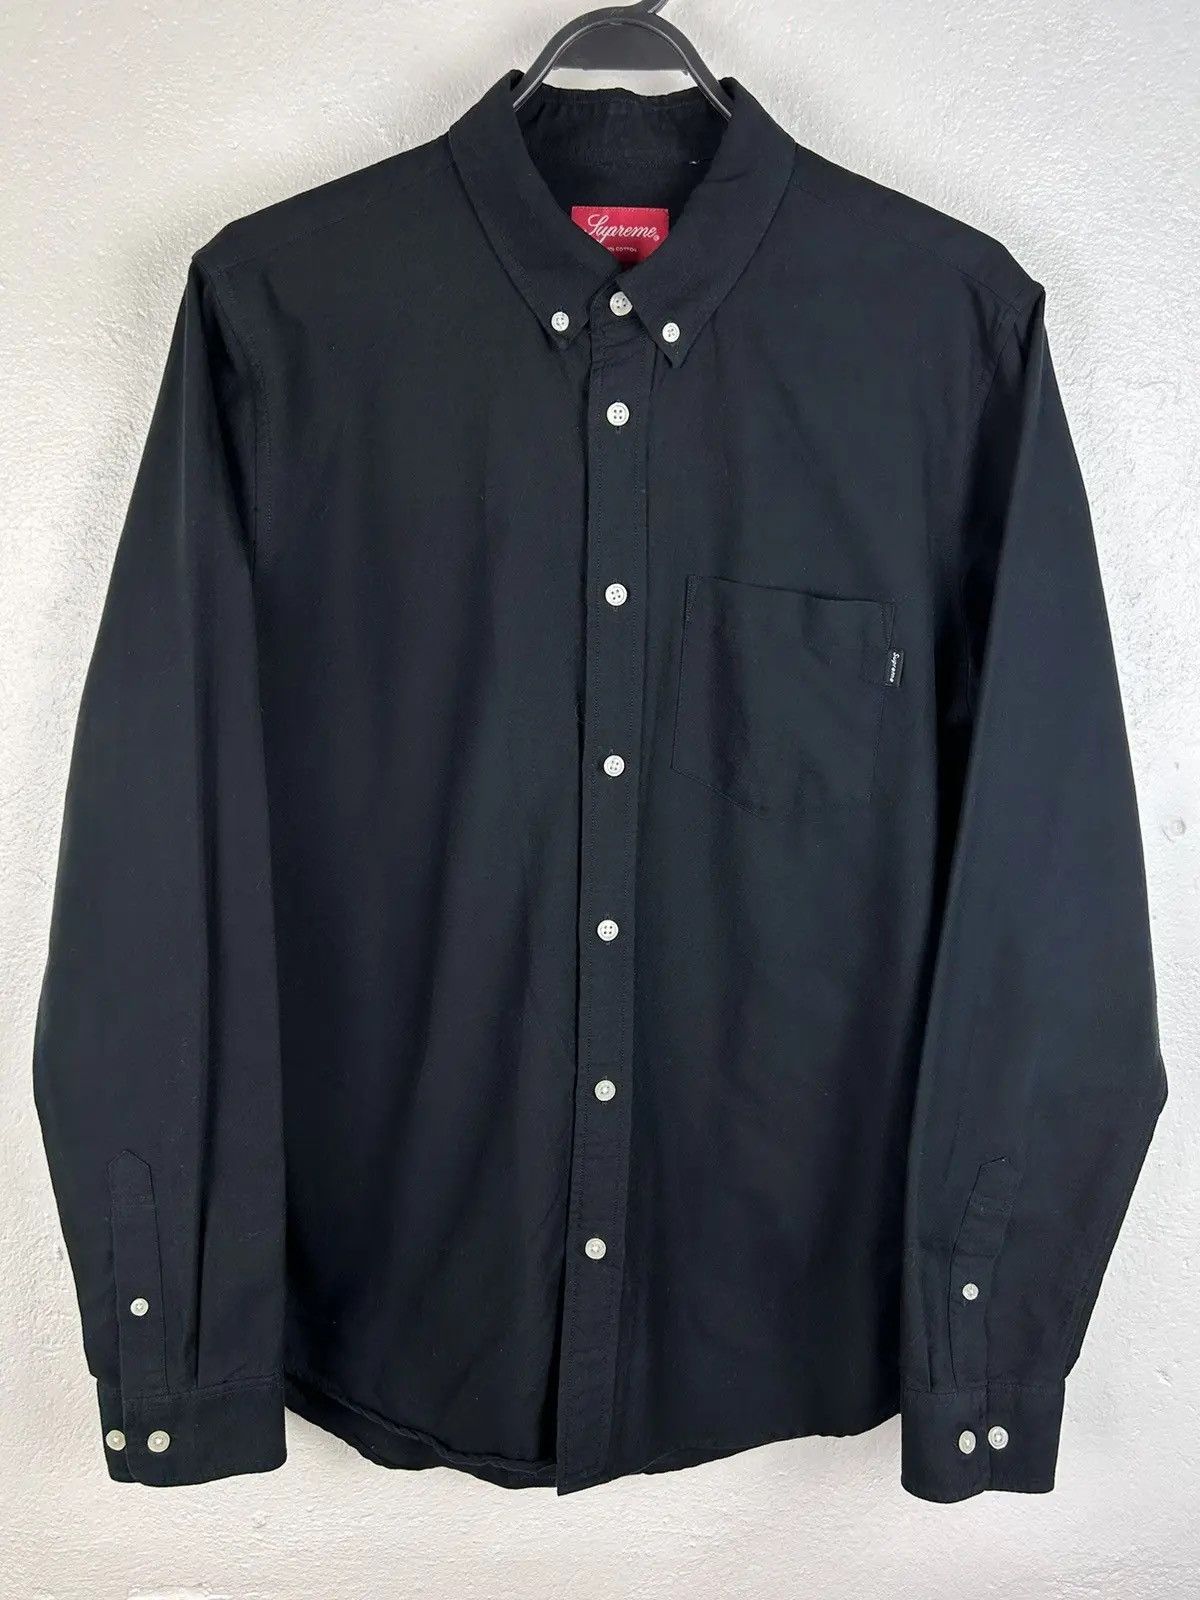 Supreme Supreme FW17 Oxford Shirt Long Sleeve Button Up In Black | Grailed